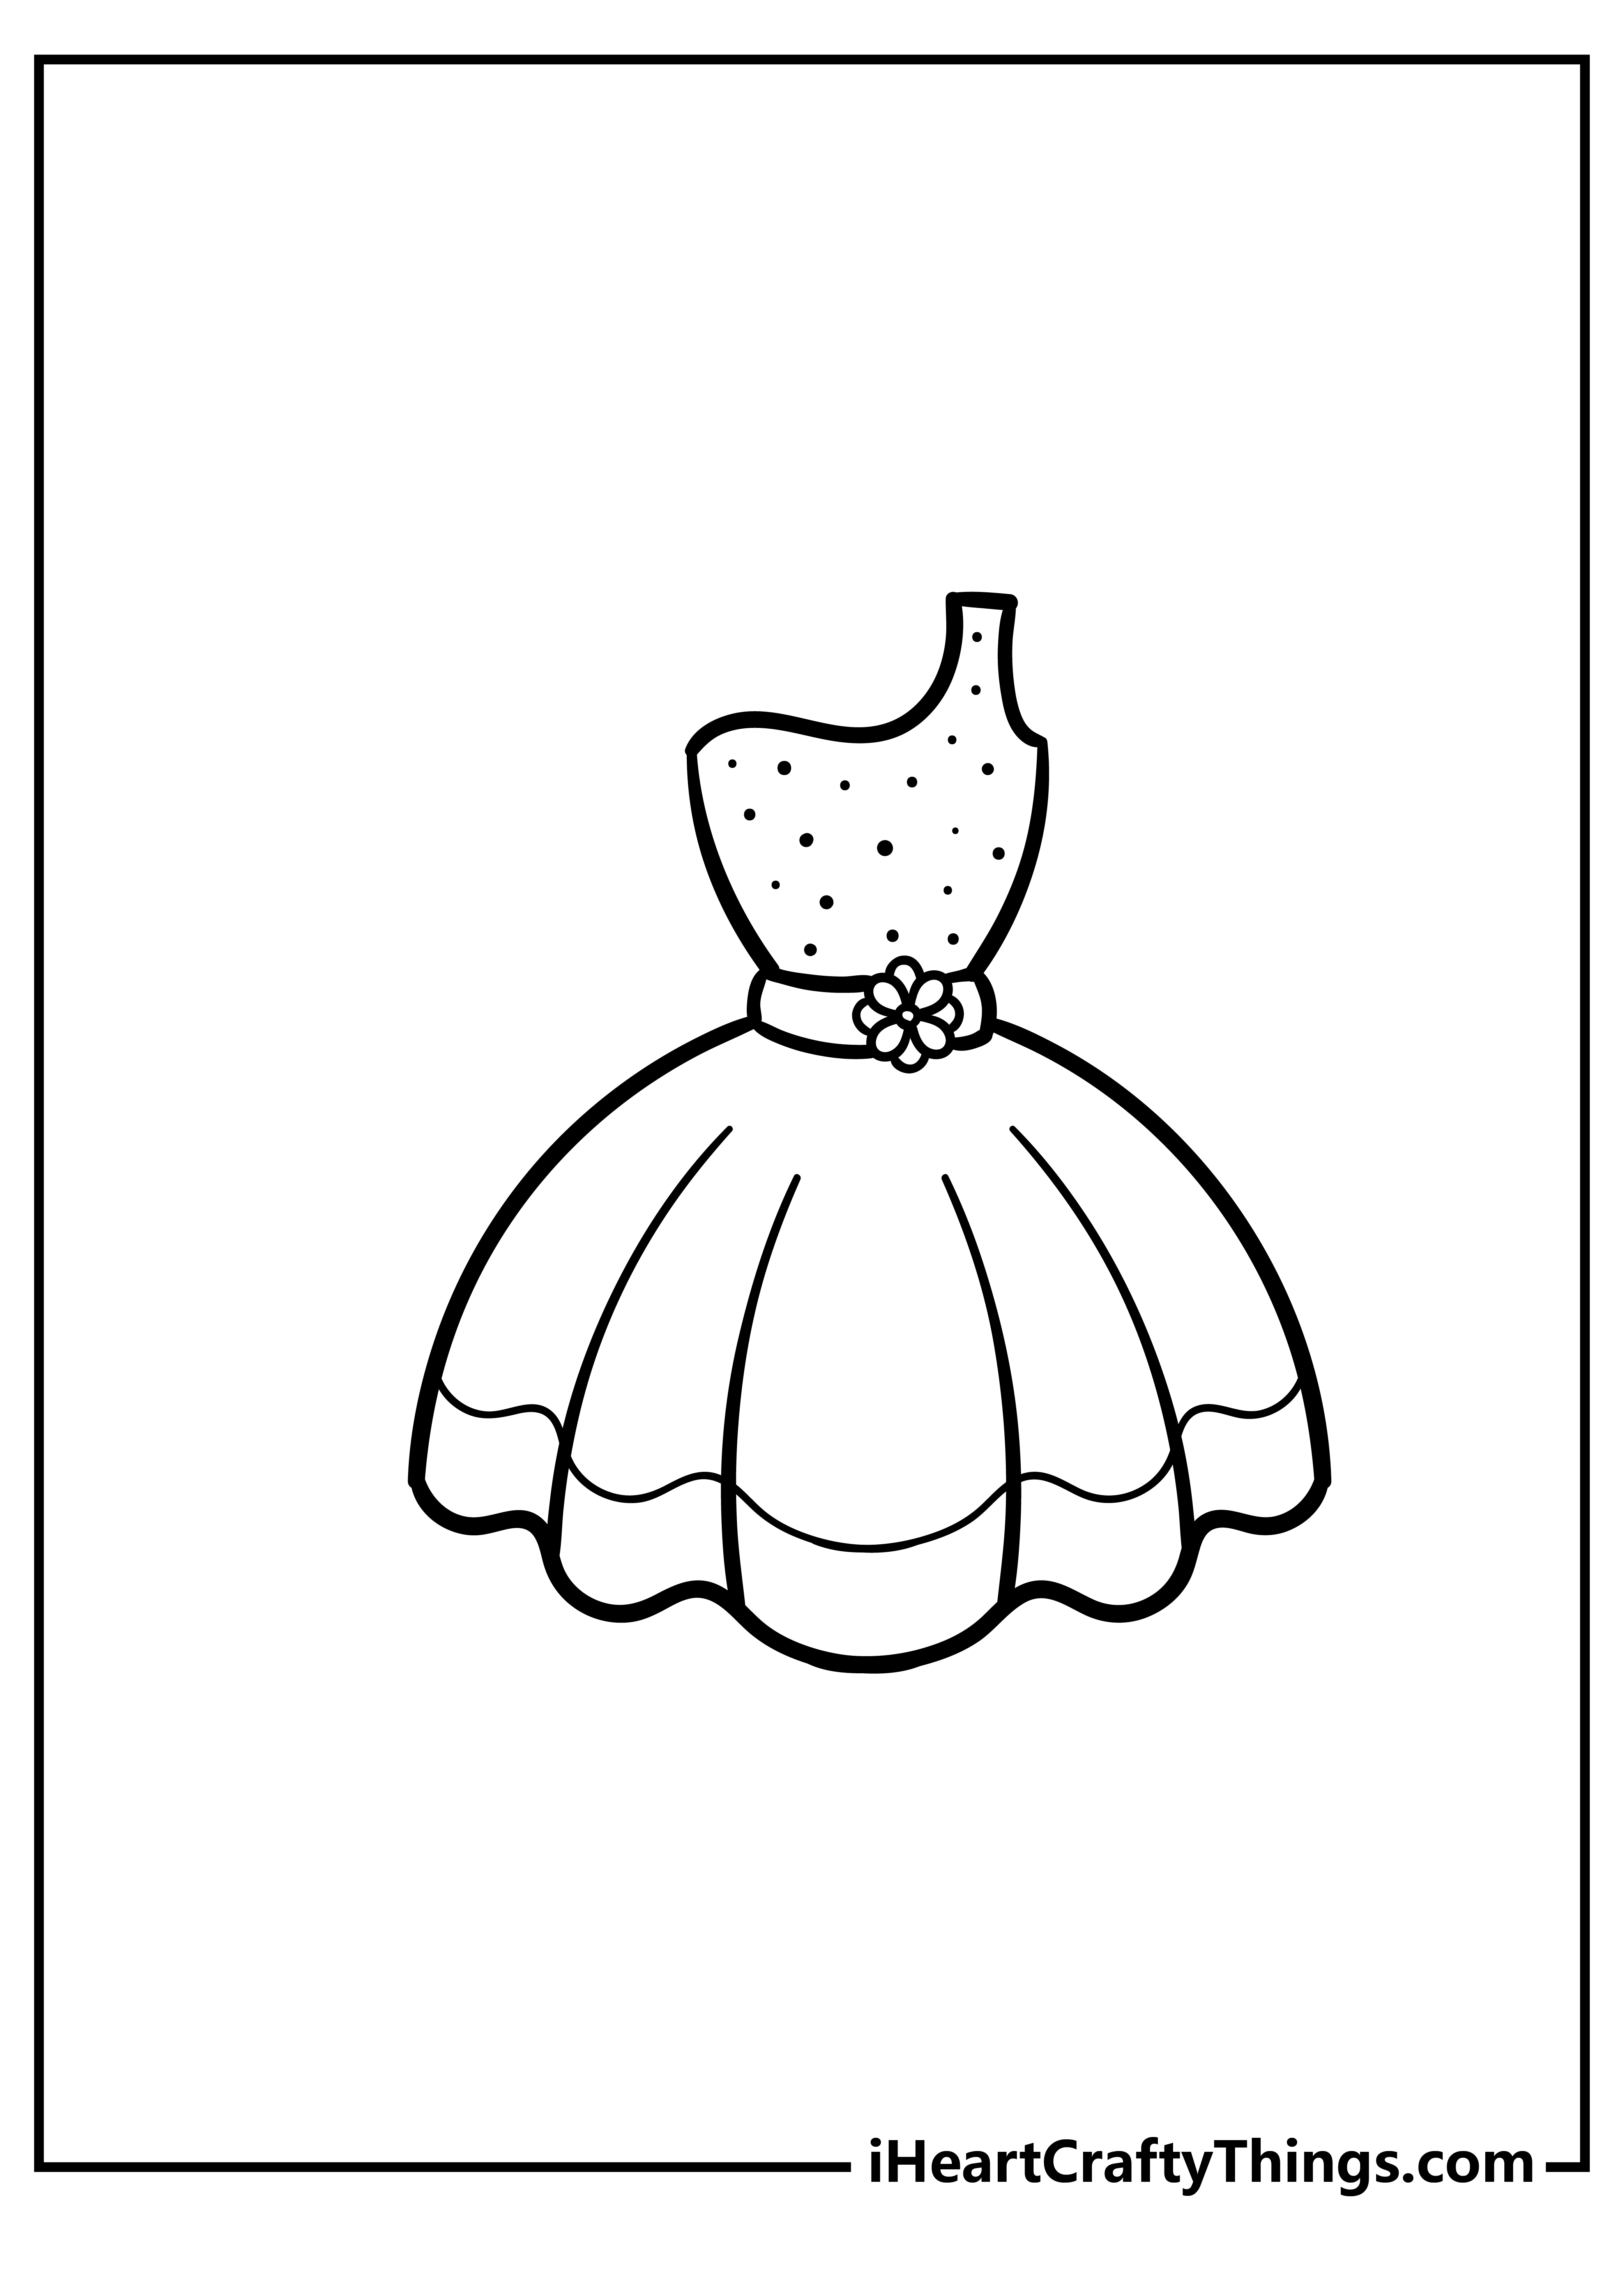 Dress Coloring Book for adults free download